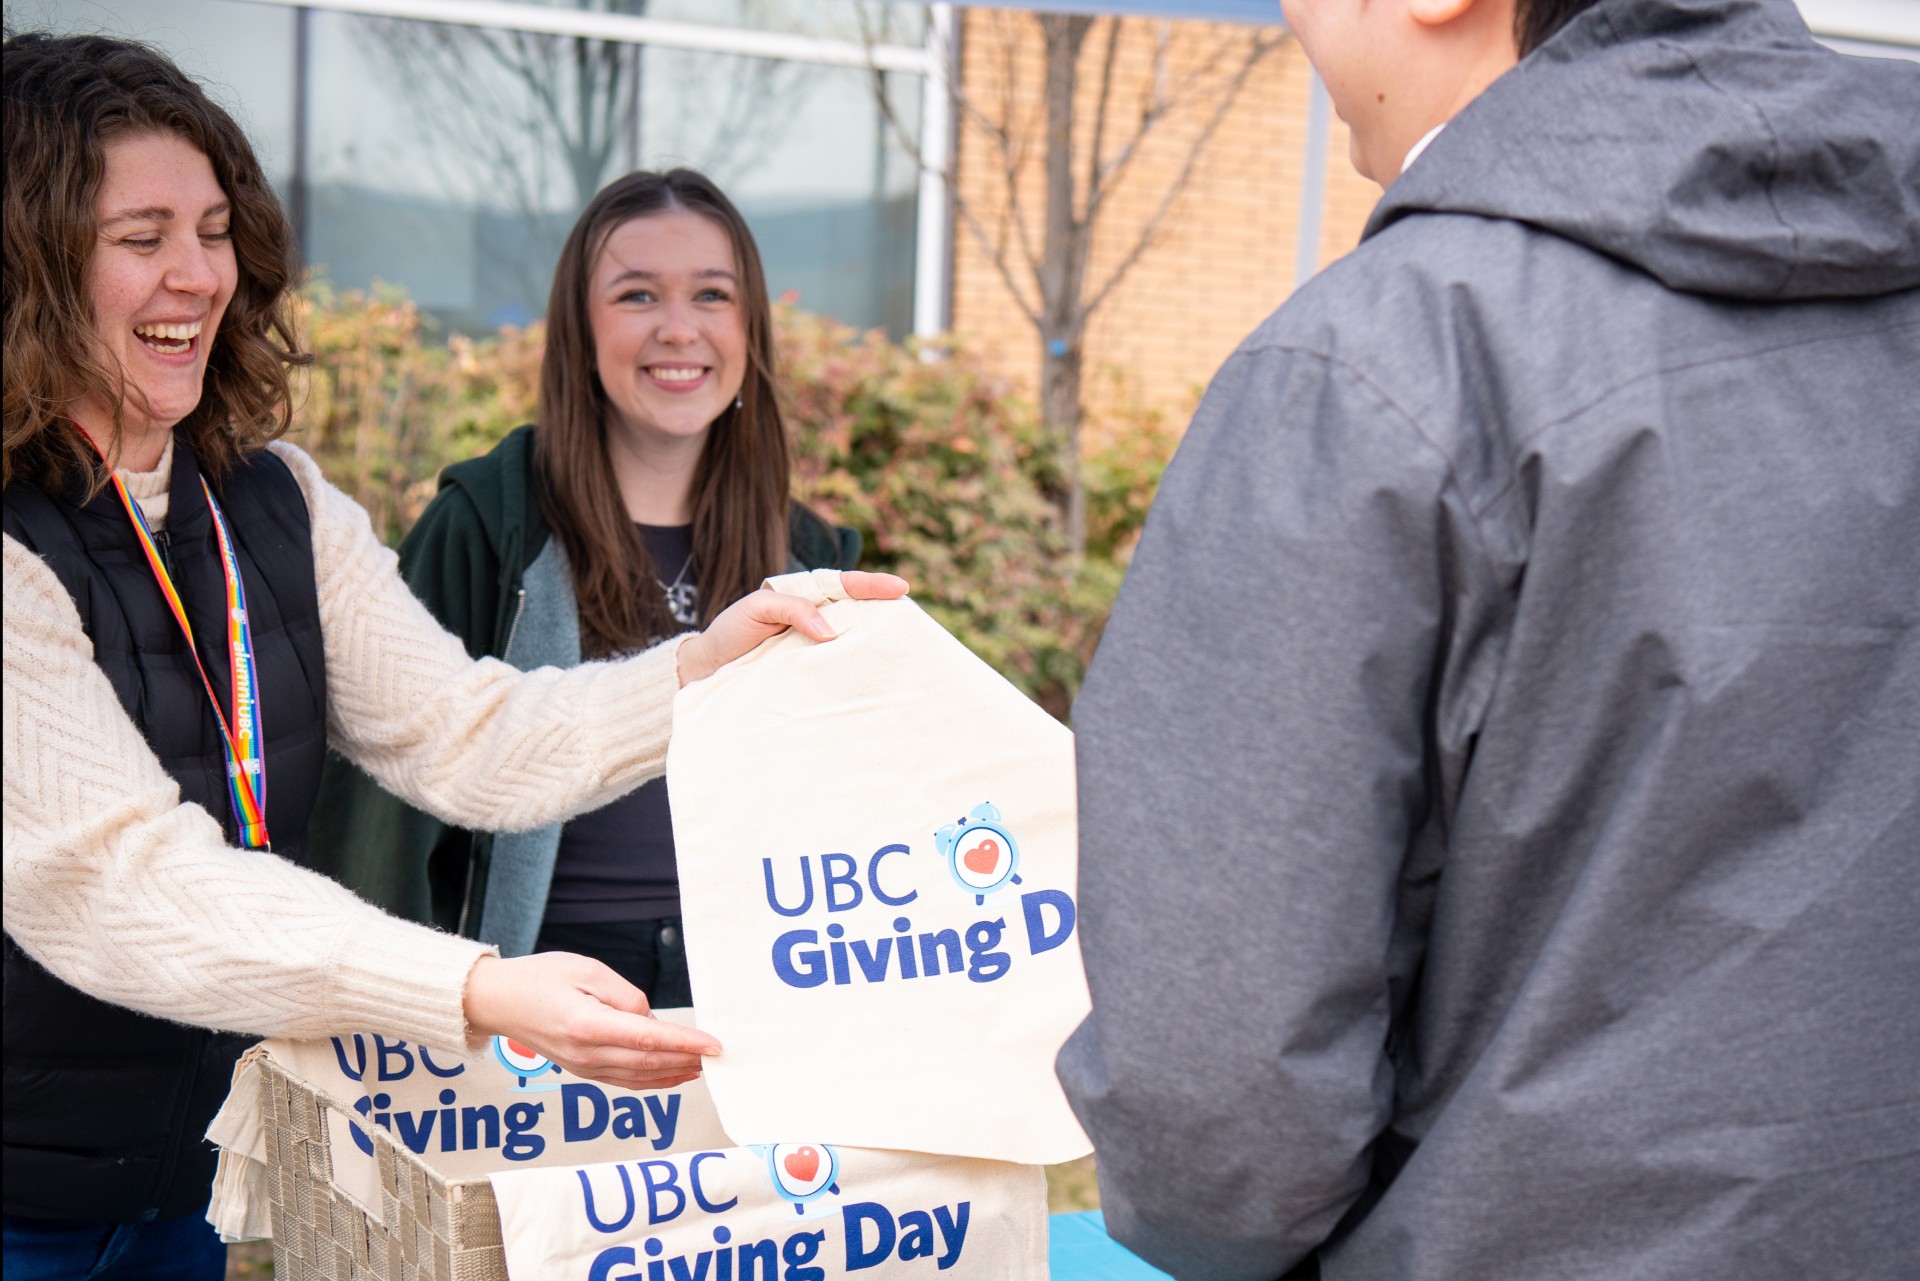 Two volunteers handing out tote bags at UBC Giving Day event.